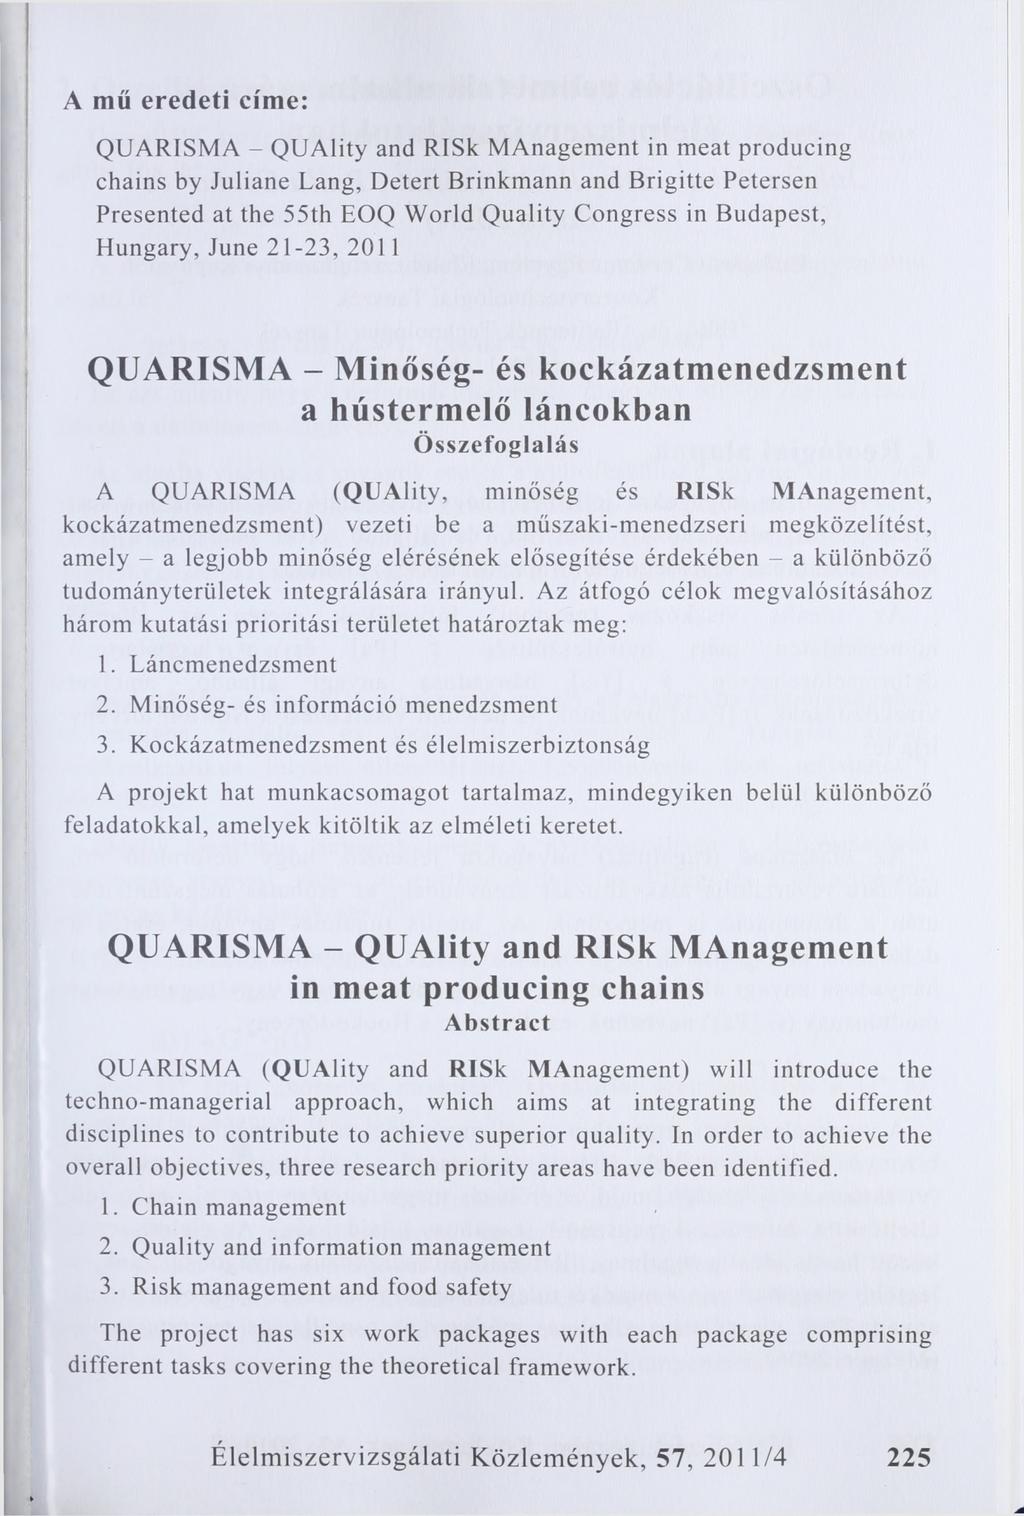 A mű eredeti címe: QUARISMA - QUAlity and RISk MAnagement in meat producing chains by Juliane Lang, Detert Brinkmann and Brigitte Petersen Presented at the 55th EOQ World Quality Congress in